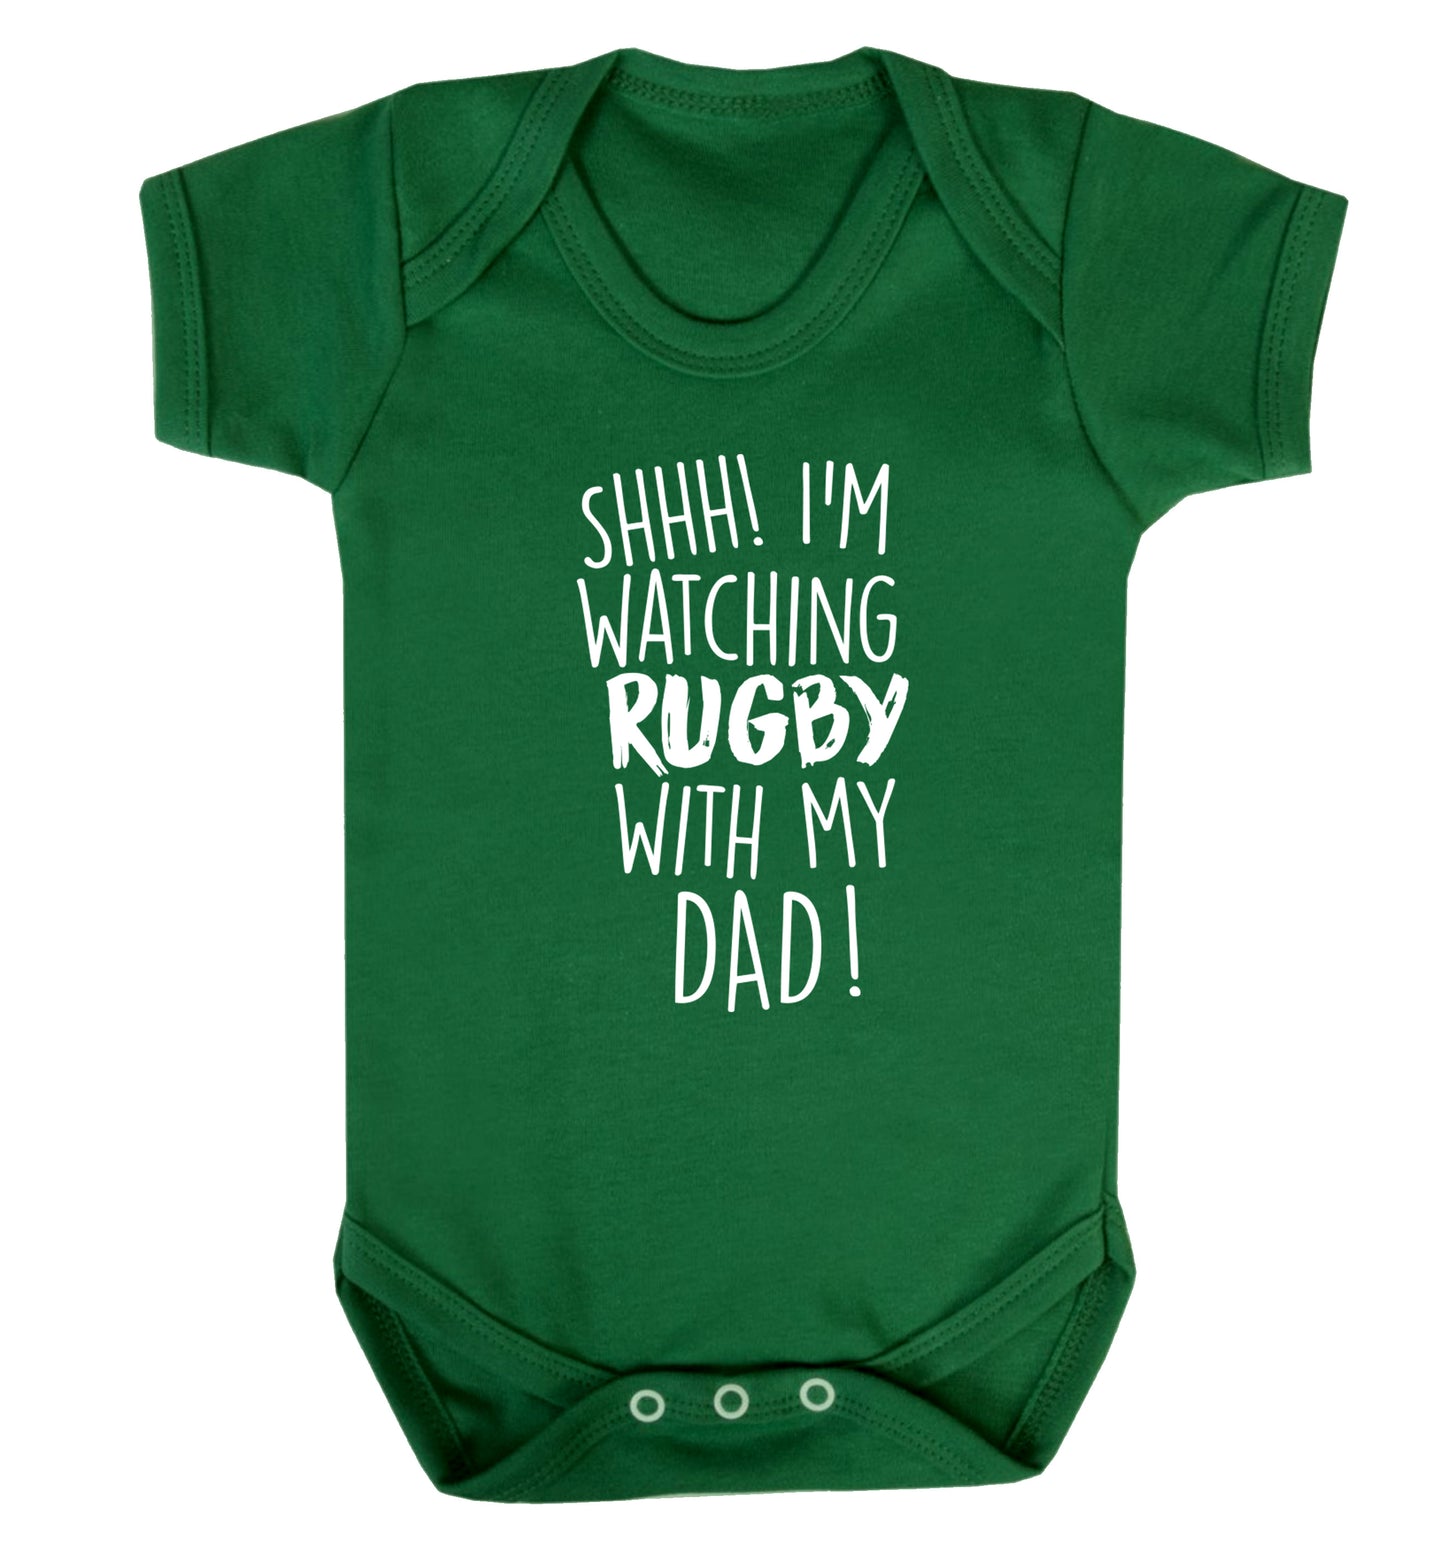 Shh... I'm watching rugby with my dad Baby Vest green 18-24 months